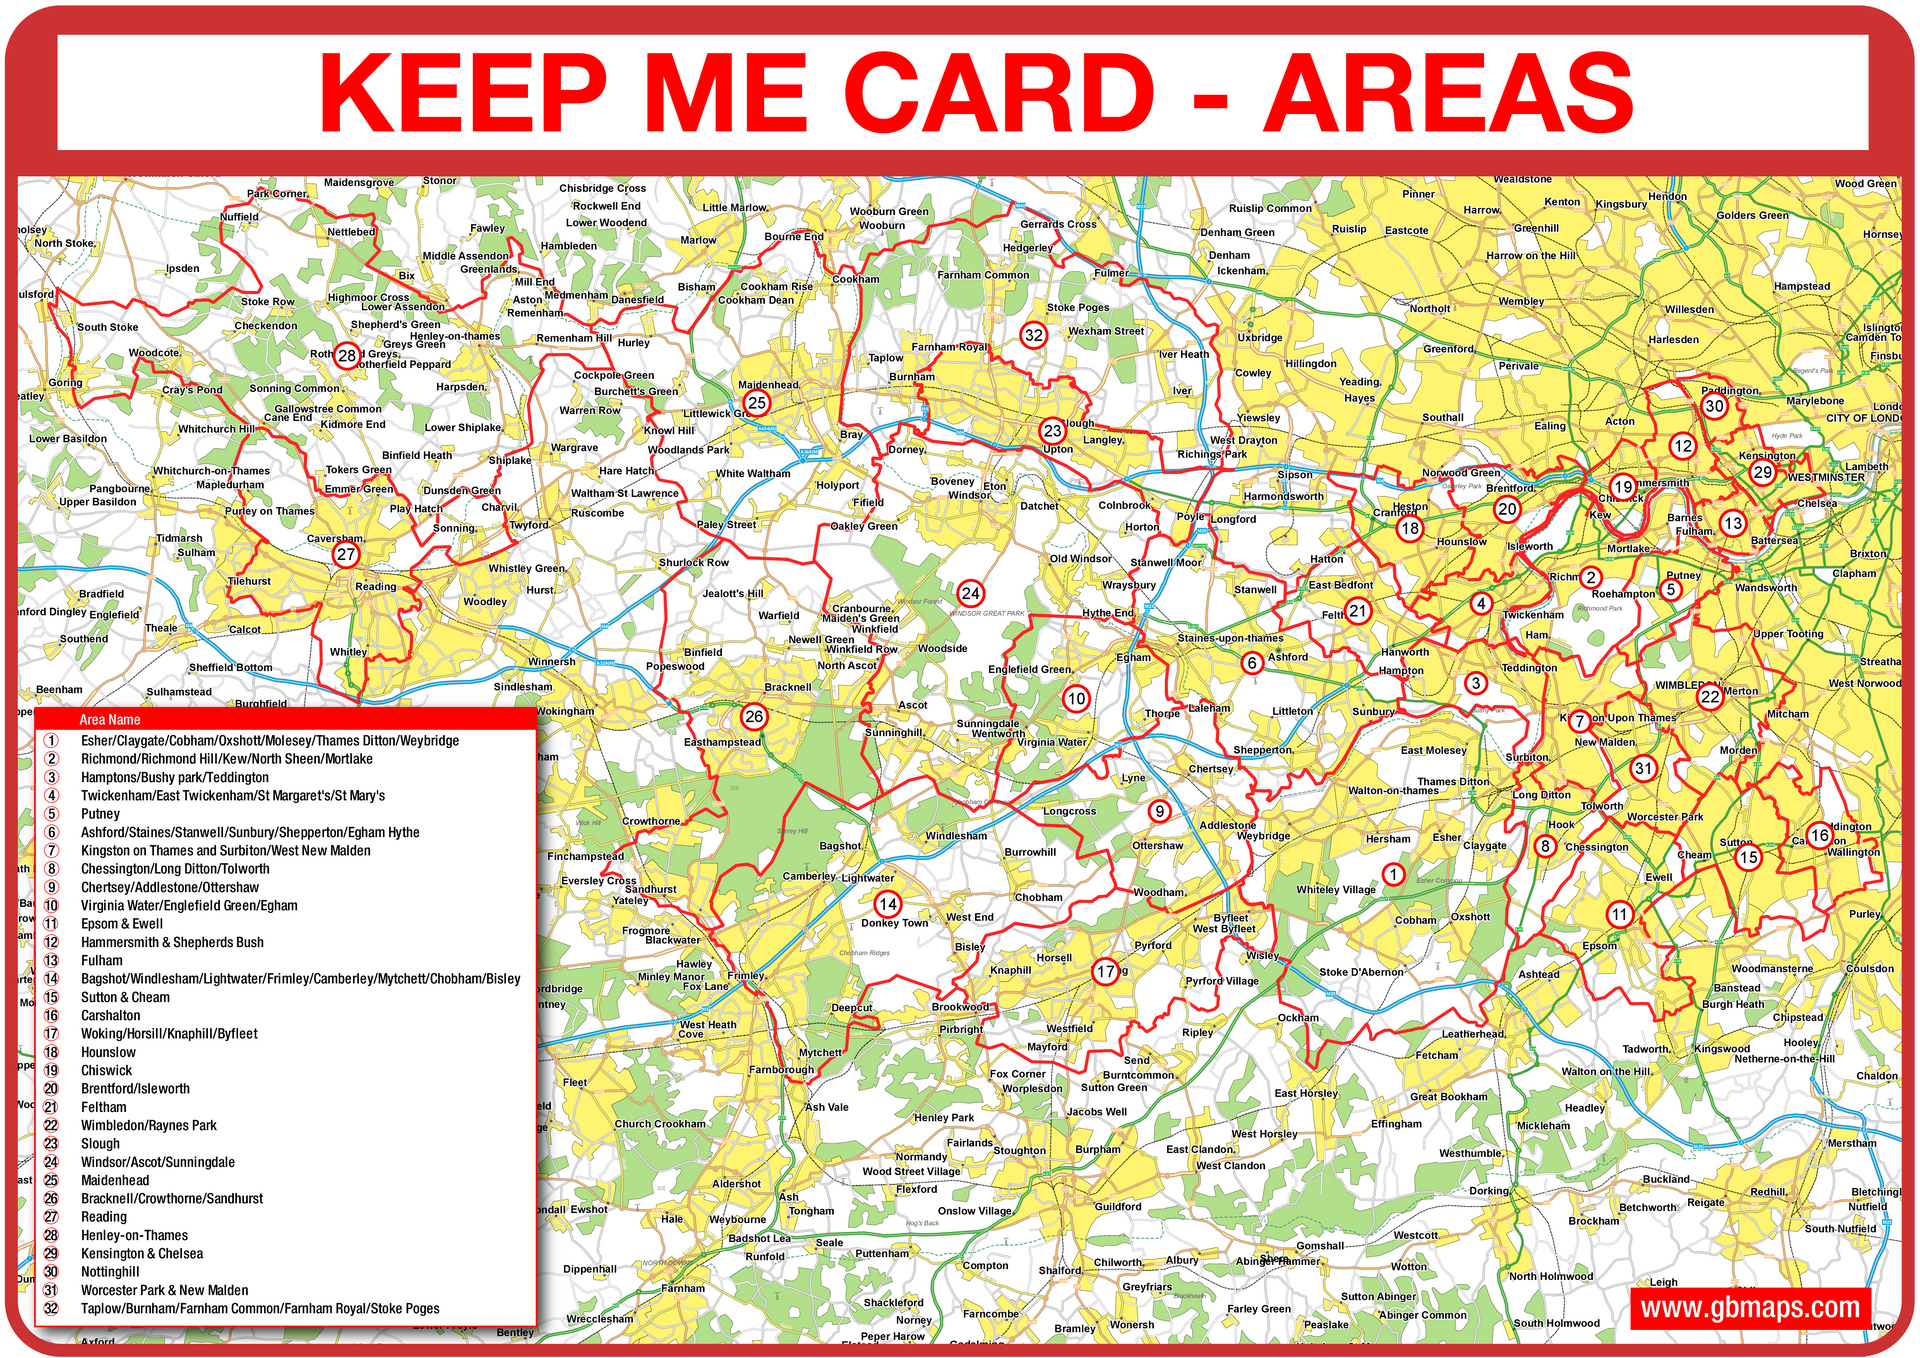 Keep Me Card Delivery Areas